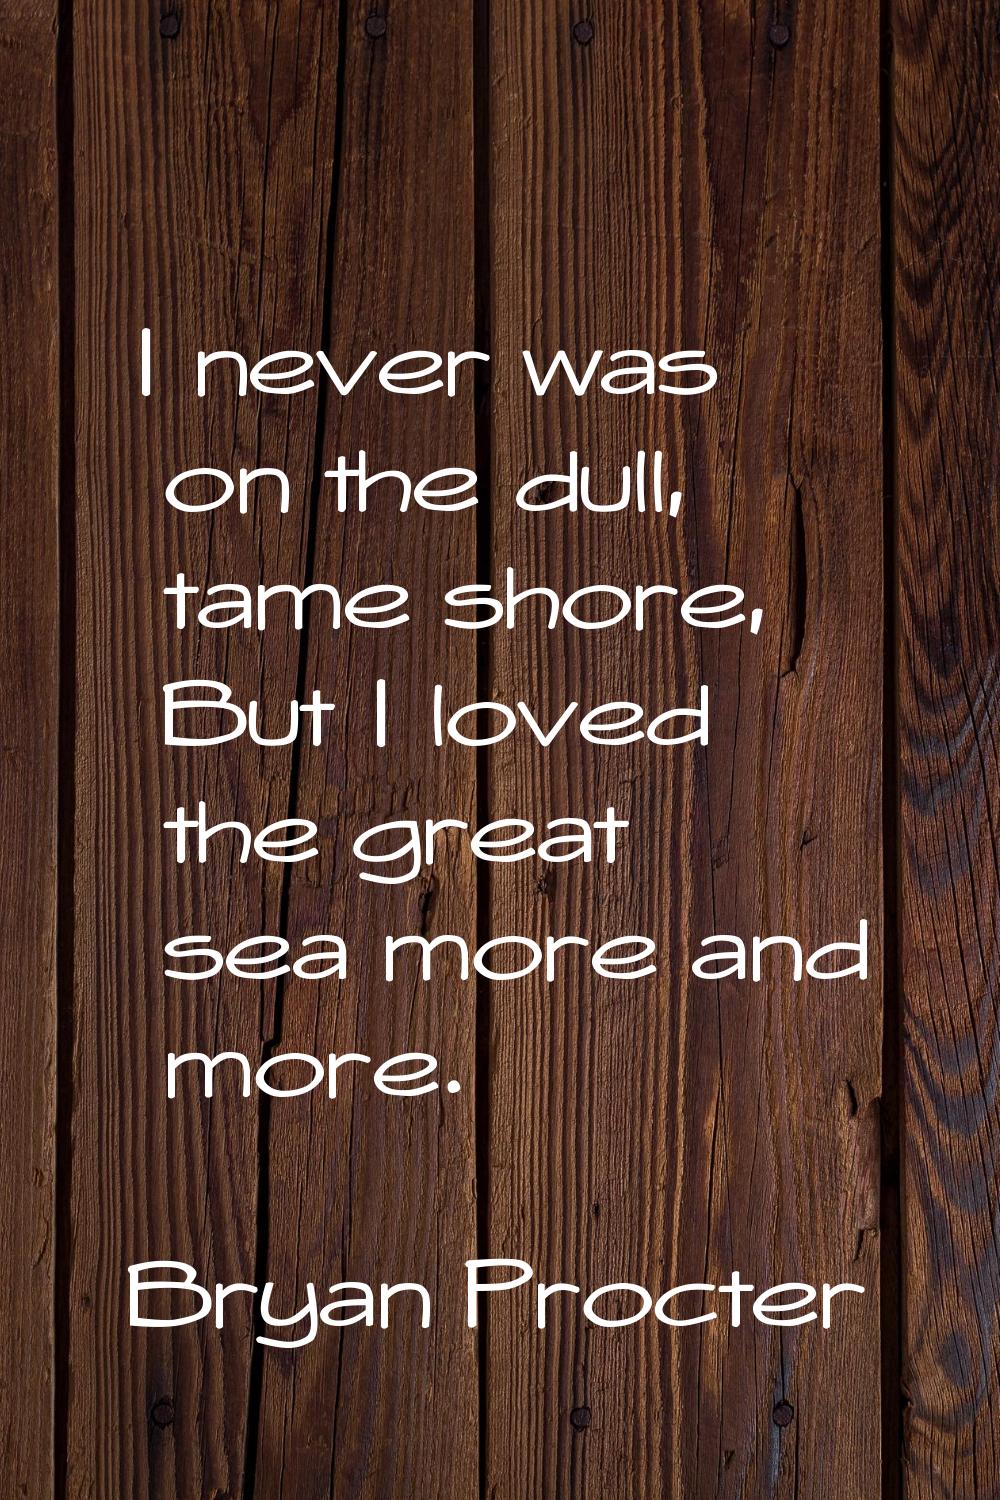 I never was on the dull, tame shore, But I loved the great sea more and more.